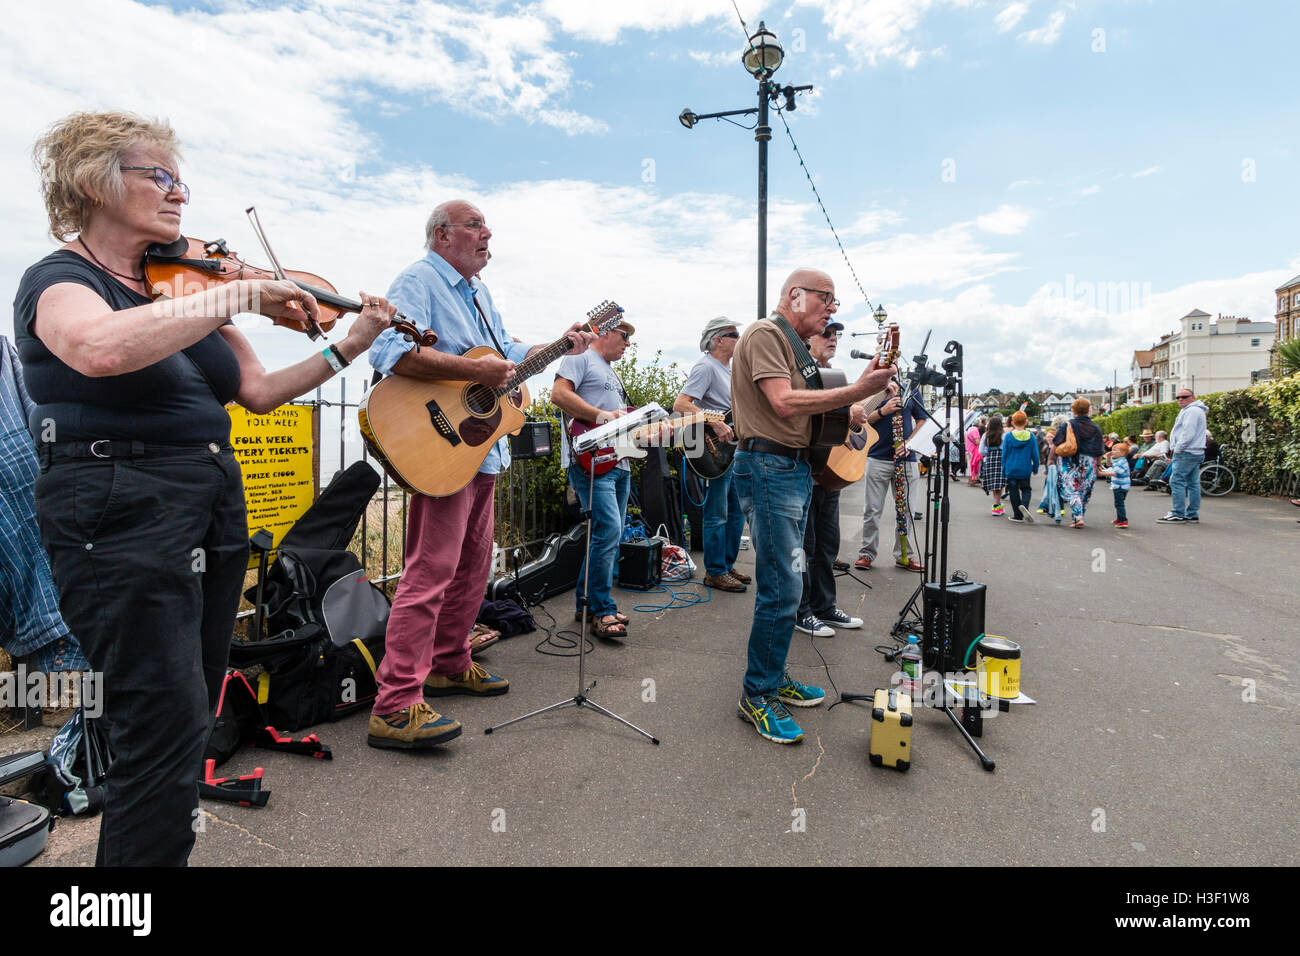 The Bay Boys, musical folk group of senior men playing guitars in the sunshine, together with a woman fiddle player, perform a concert on the seafront. Stock Photo